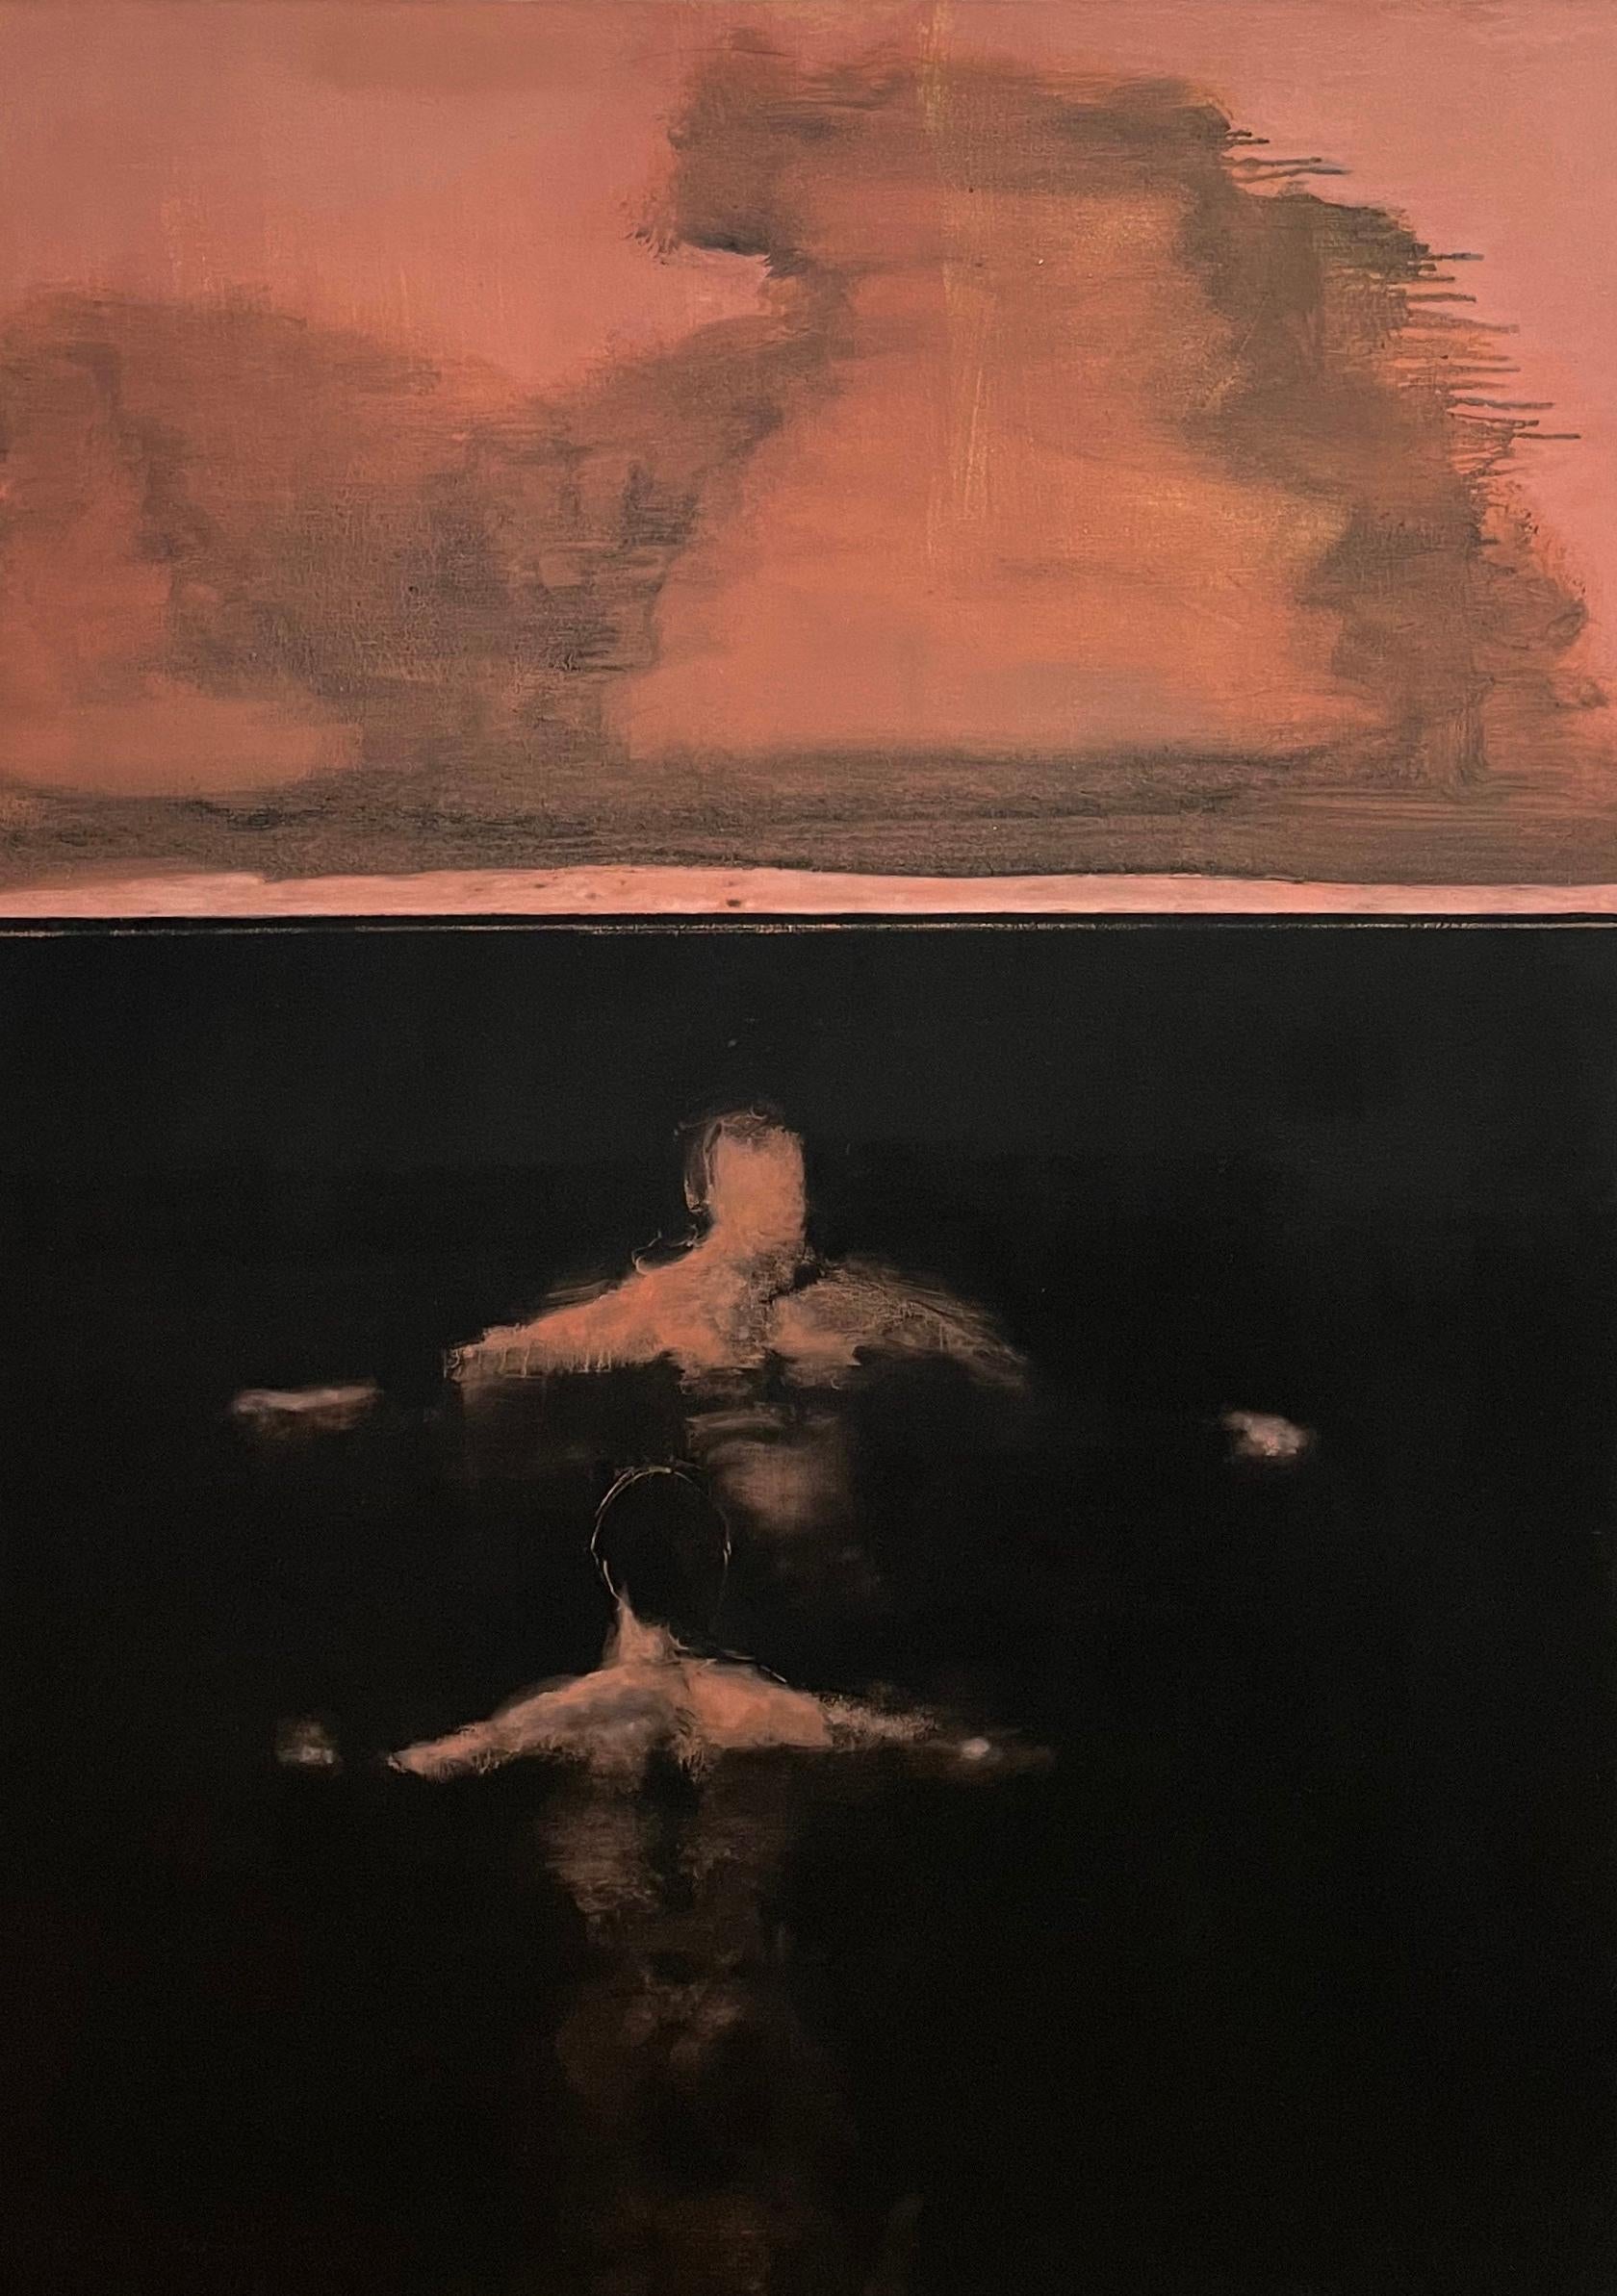 David Konigsberg Landscape Painting - Lately, Seascape, Figures Swimming in Ocean, Dark Charcoal Black, Coral Clouds